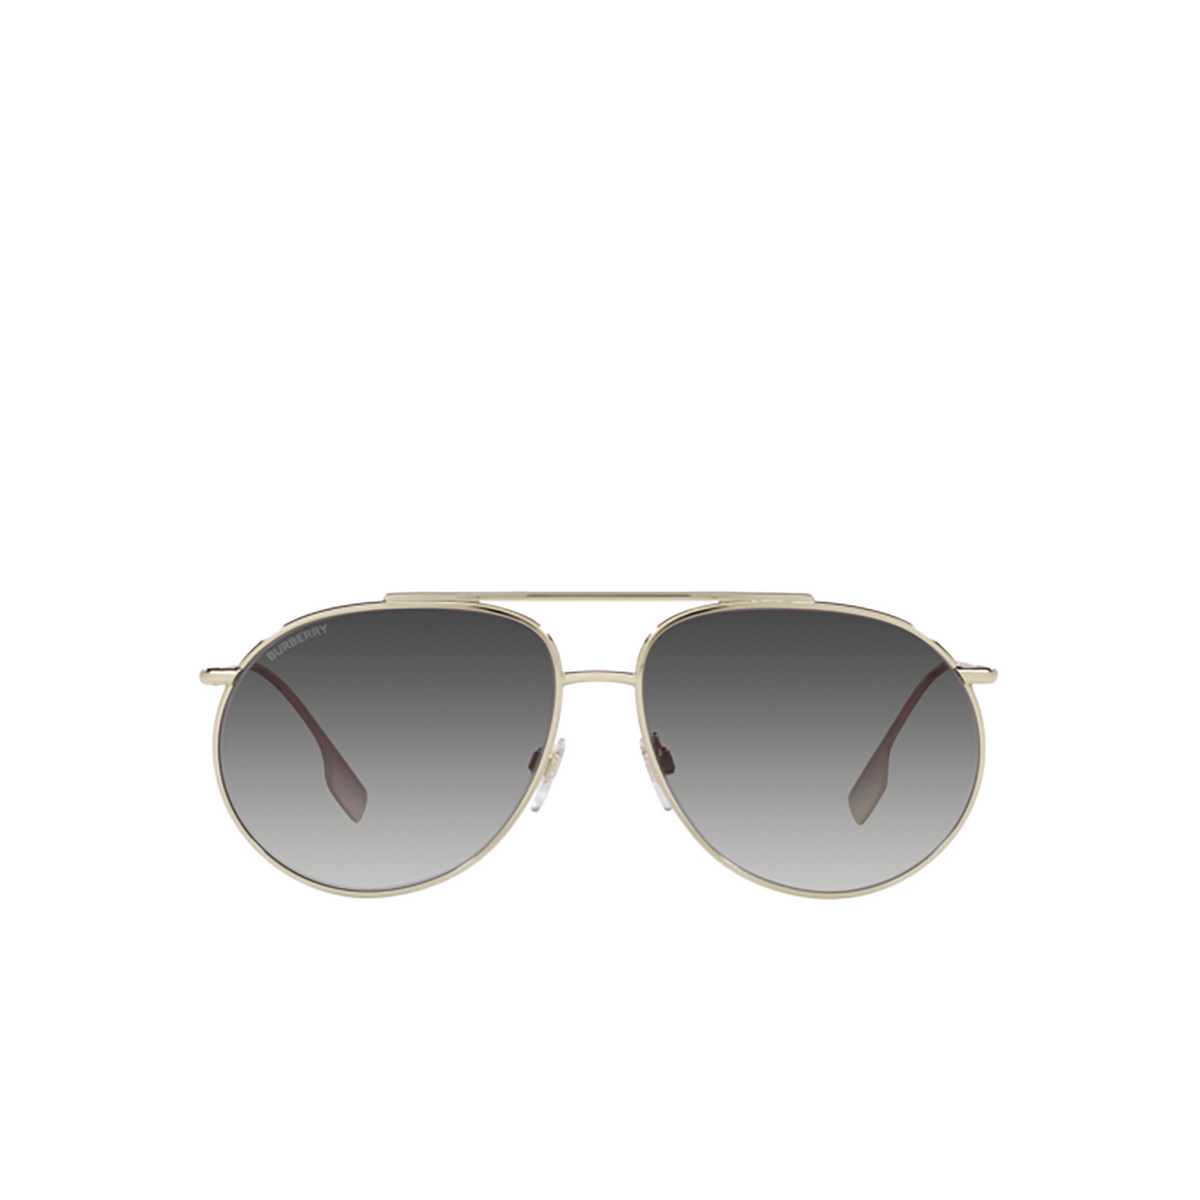 Burberry ALICE Sunglasses 11098G Light Gold - front view